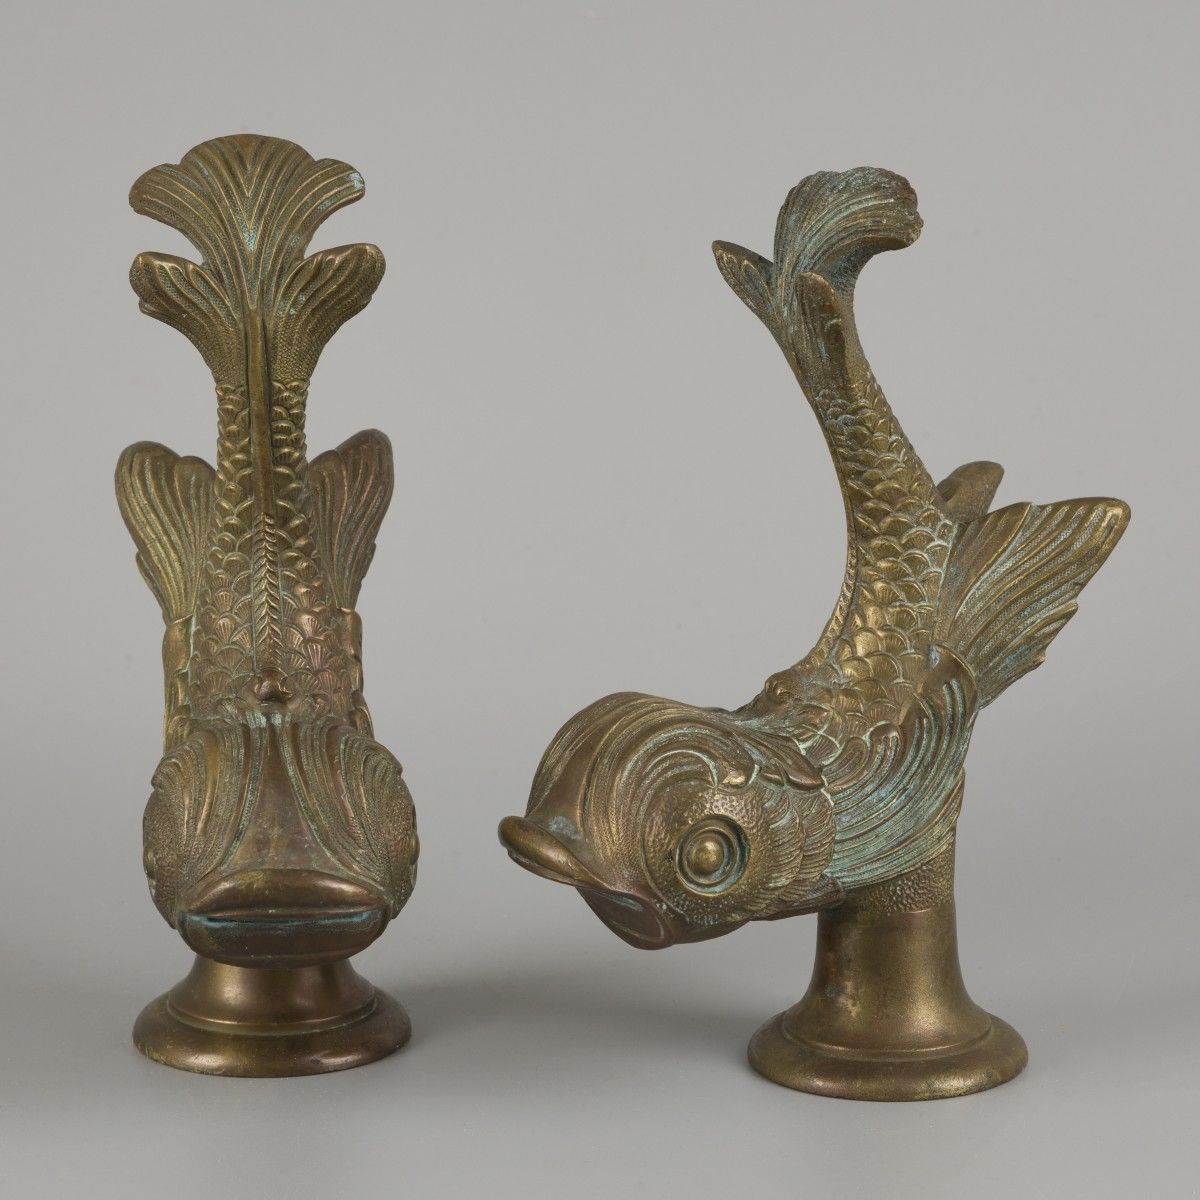 A set of (2) bronze water faucets in the shape of fish, France, ca. 1900. Mit Öf&hellip;